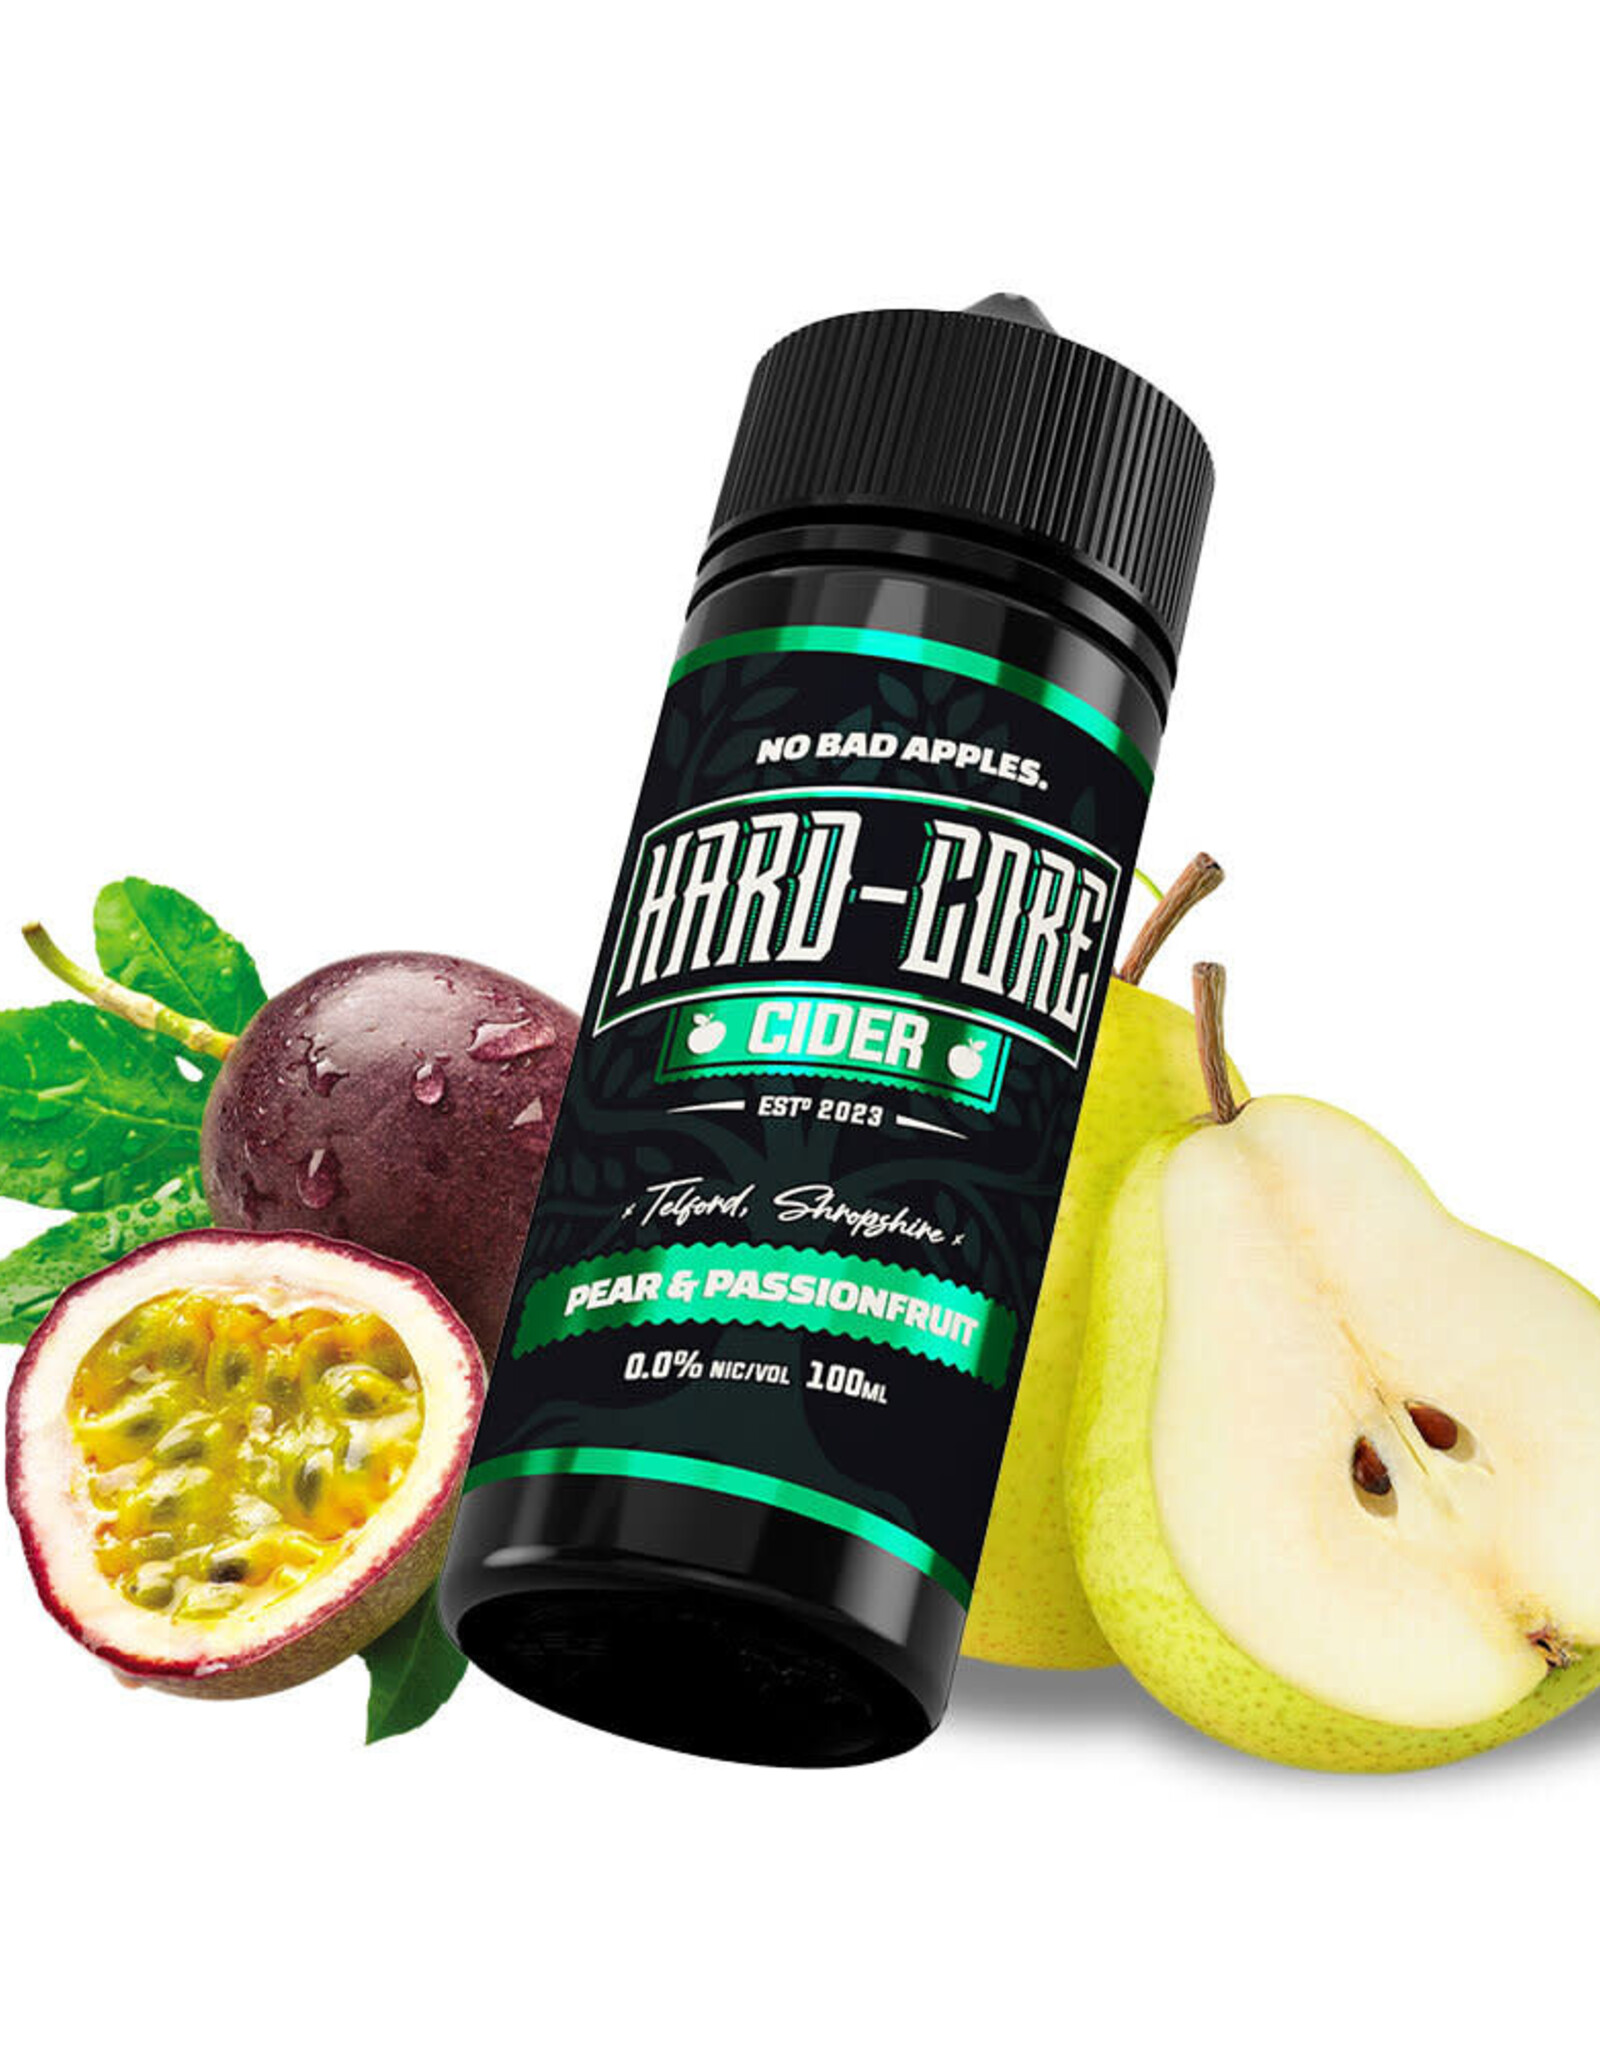 No Bad Apples Hard-Core Cider - Pear & Passionfruit 100ml